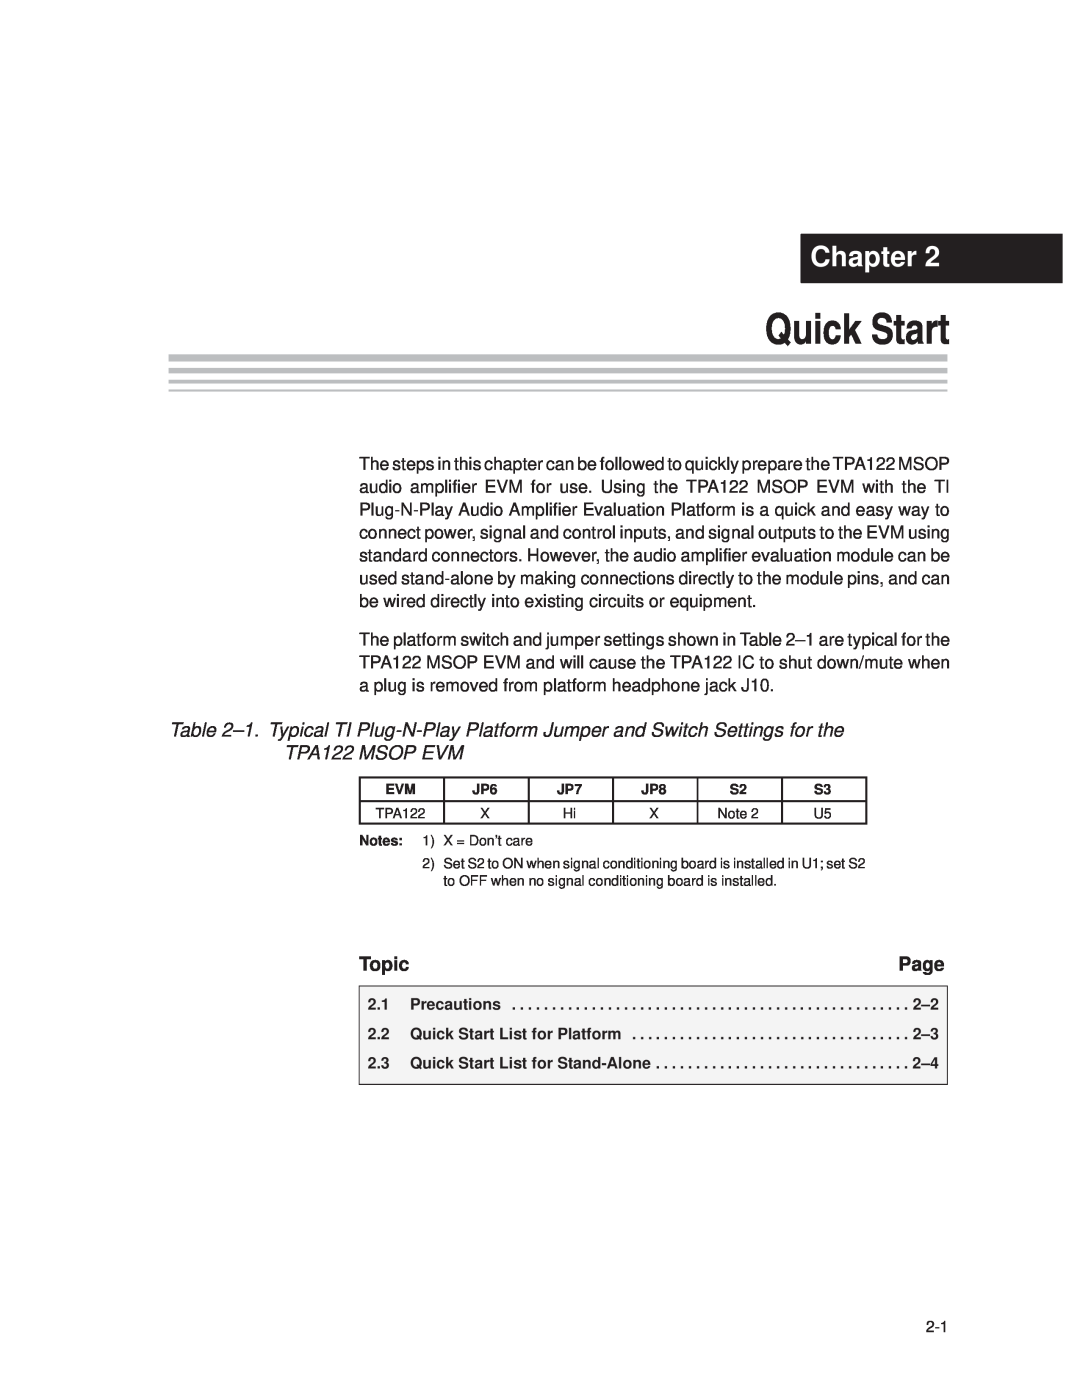 Texas Instruments SLOU025 manual Chapter, Page, Topic, Precautions, Quick Start List for Platform 